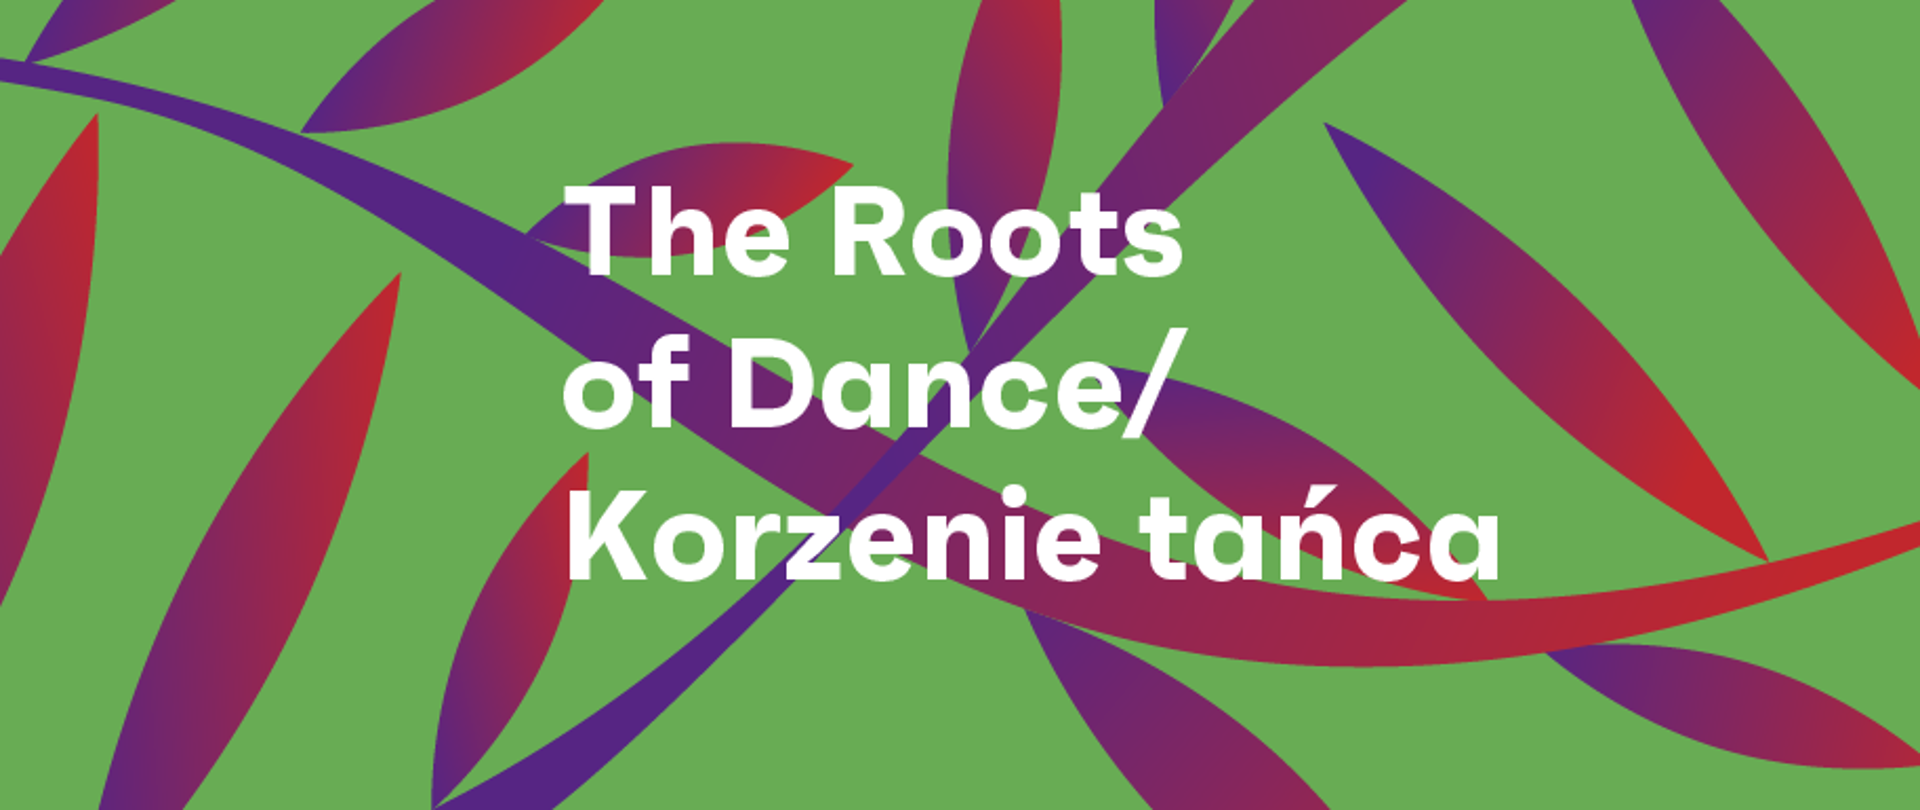 Project The Roots of Dance / Korzenie tańca - the National Institute of Music and Dance 